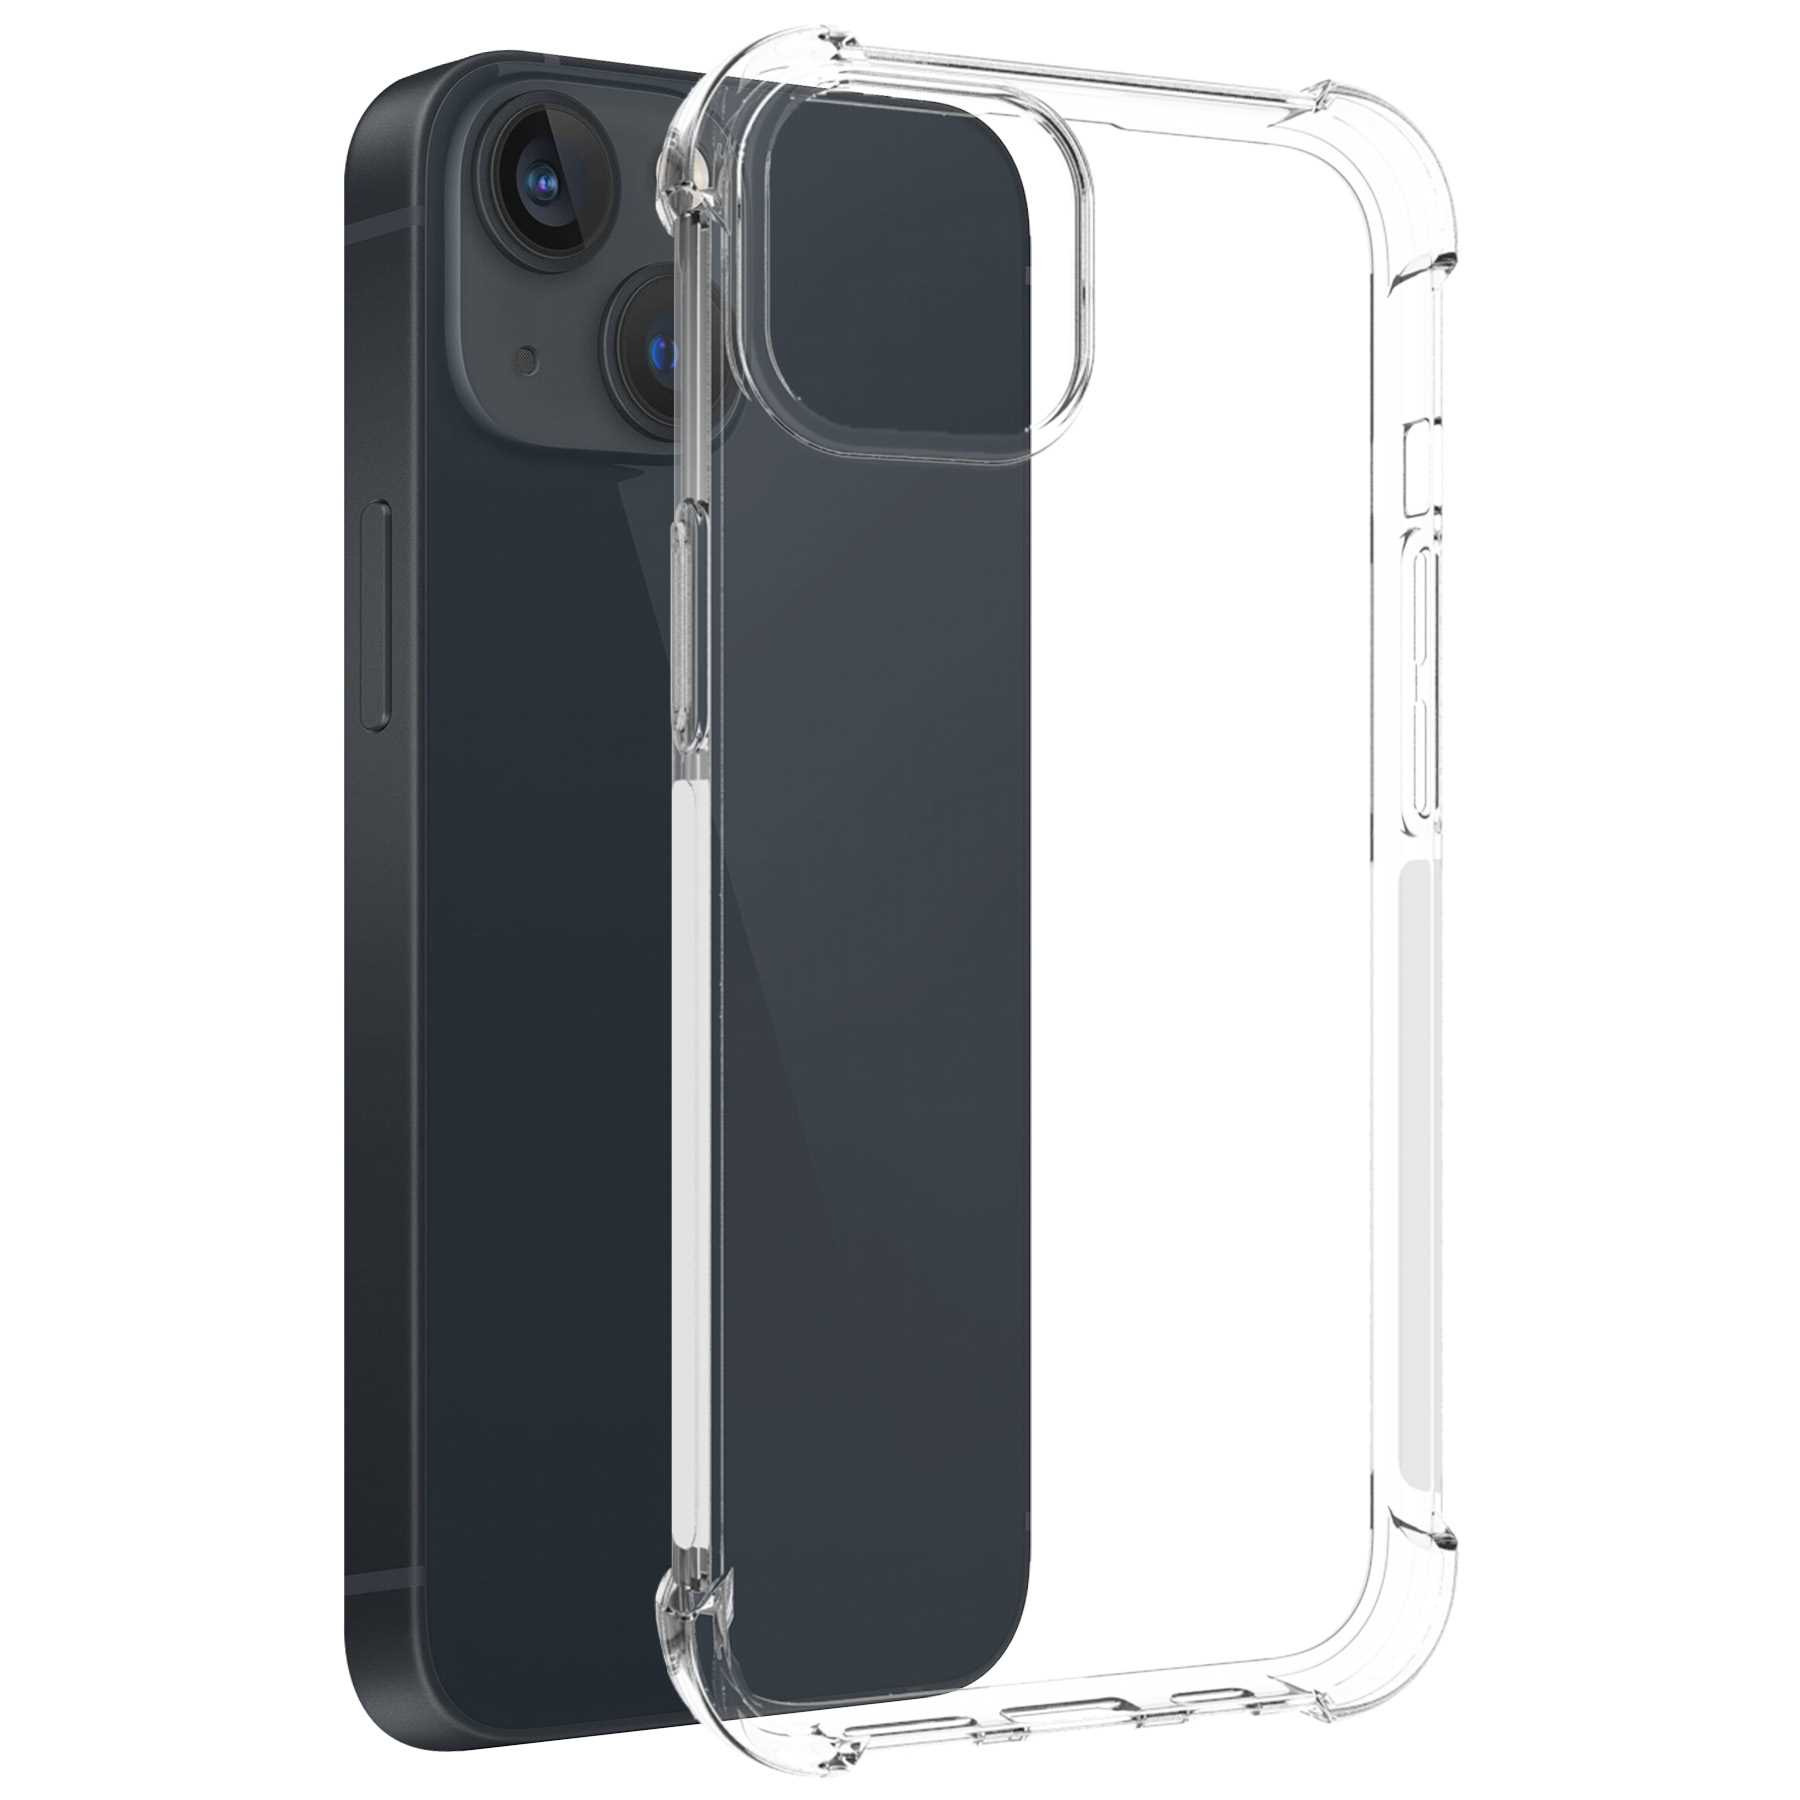 Transparent Backcover, ENERGY Apple, iPhone MTB Clear Case, Armor 14, MORE